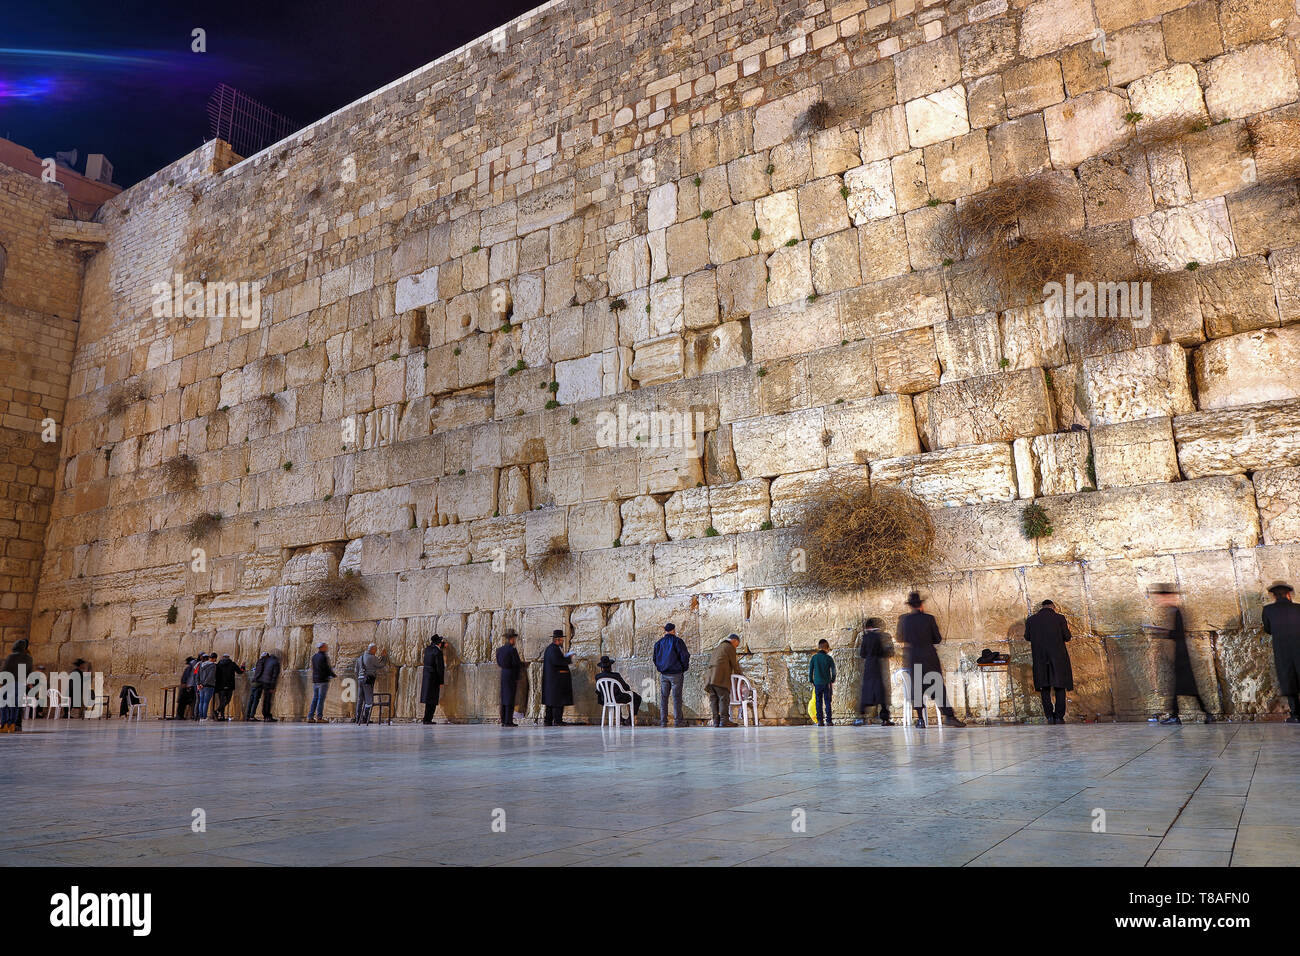 Praying at the Western 'Wailing' Wall of Ancient Temple in Jerusalem. The Wall is the most sacred place for all Jews in the world. Stock Photo